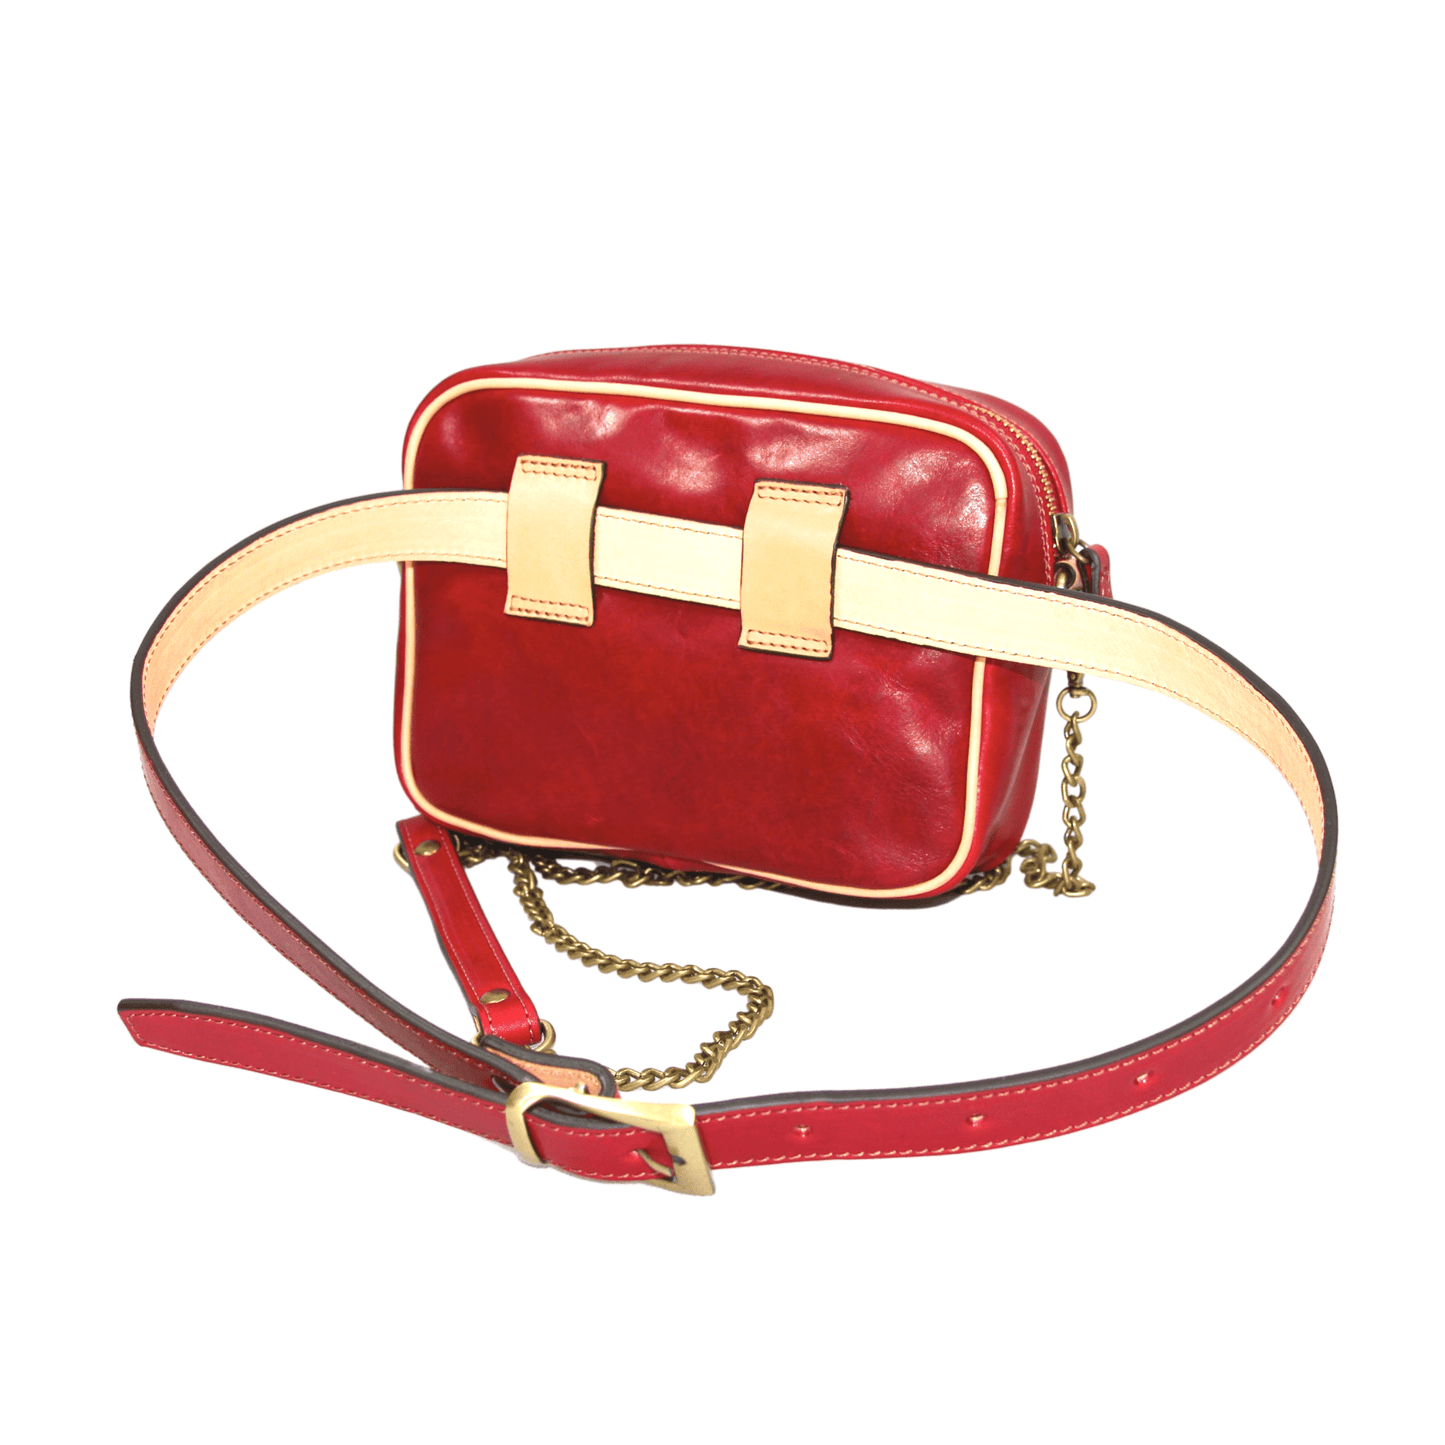 Women crossbody bag l Leather Pouch Bag_CARRAIA Red